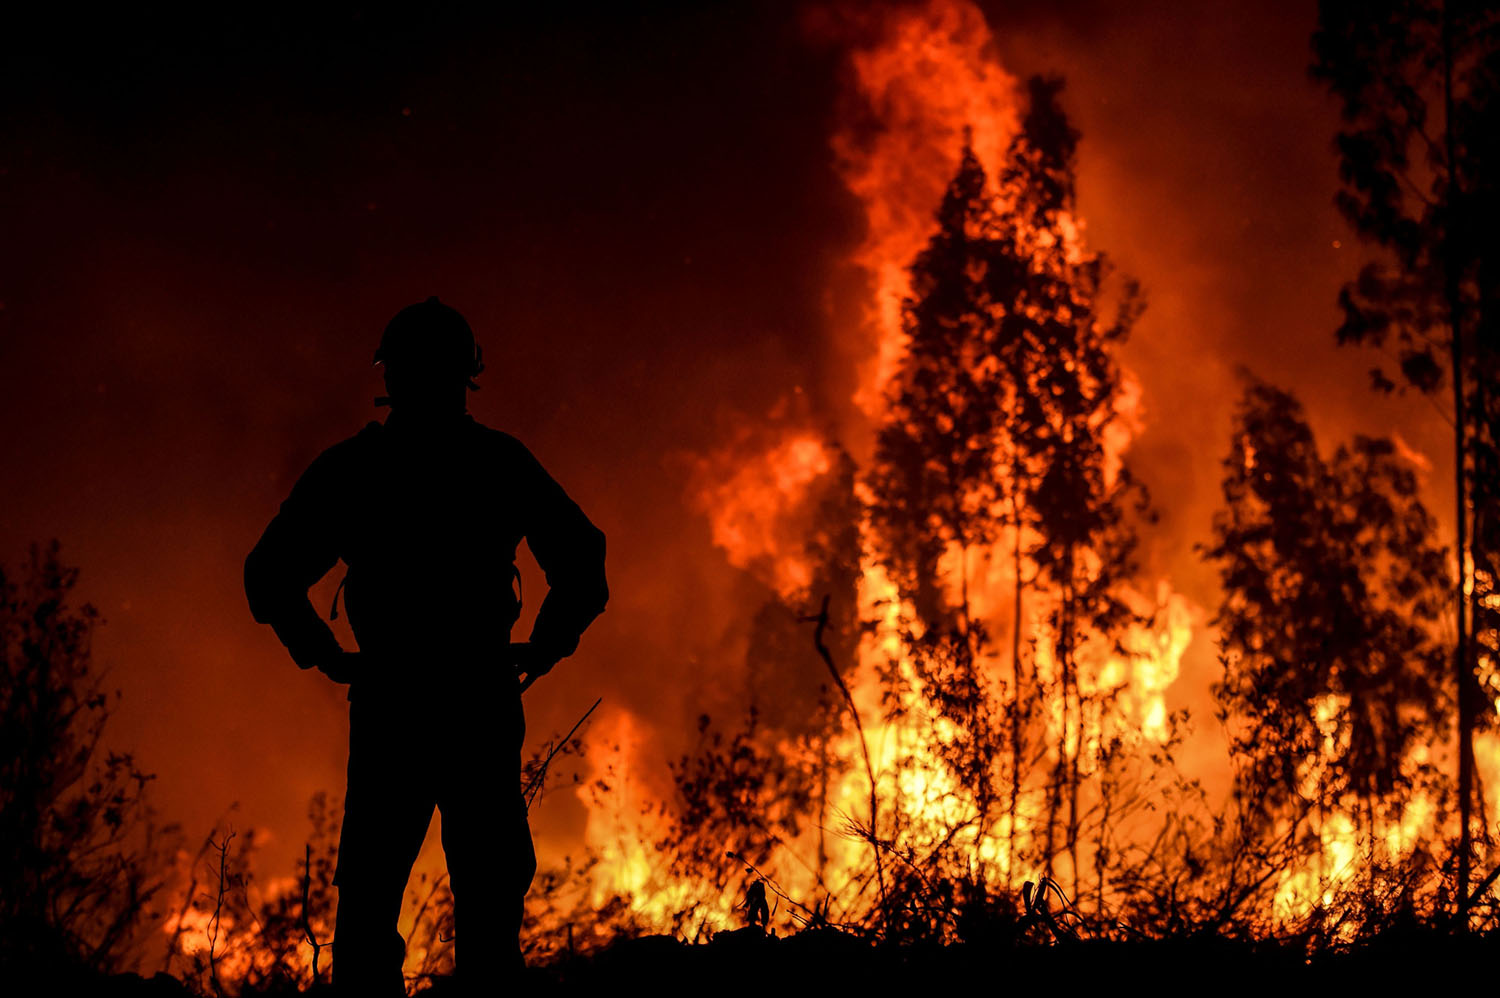 A firefighter monitors the progression of a wildfire at Amendoa, in Macao, Portugal, on 21 July 2019. Photo: Patricia De Melo Moreira / AFP / Getty